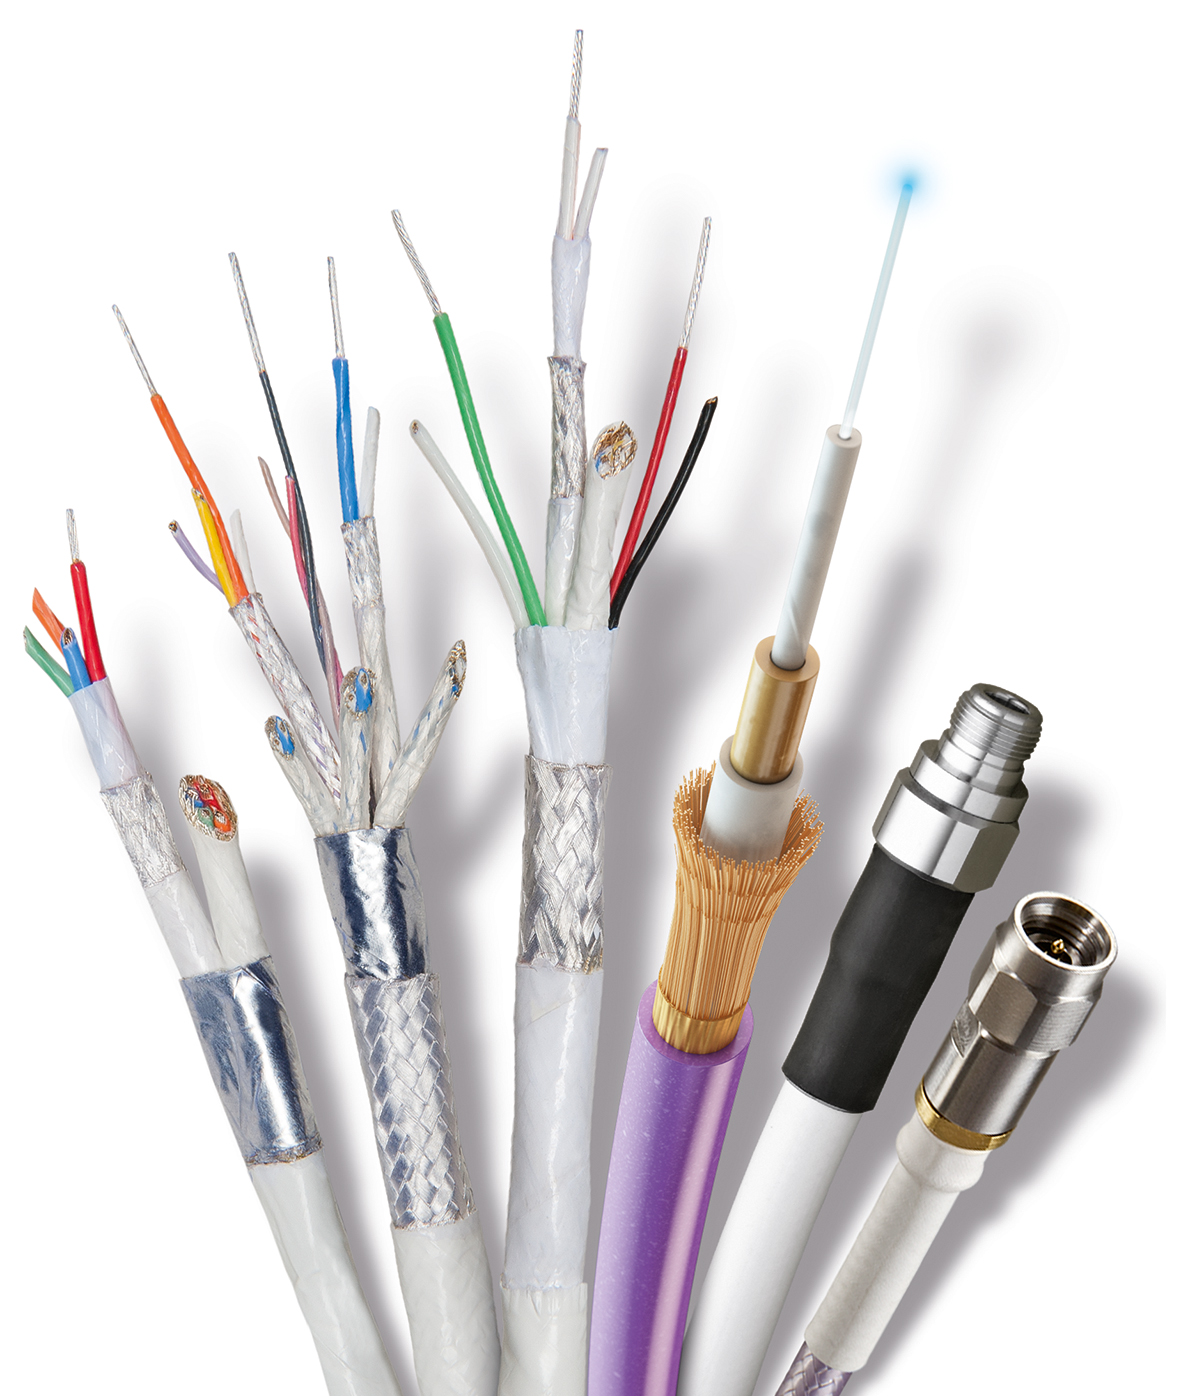 GORE® Aerospace Cables boost all aspects of performance and protection in small, lightweight, flexible and routable designs.